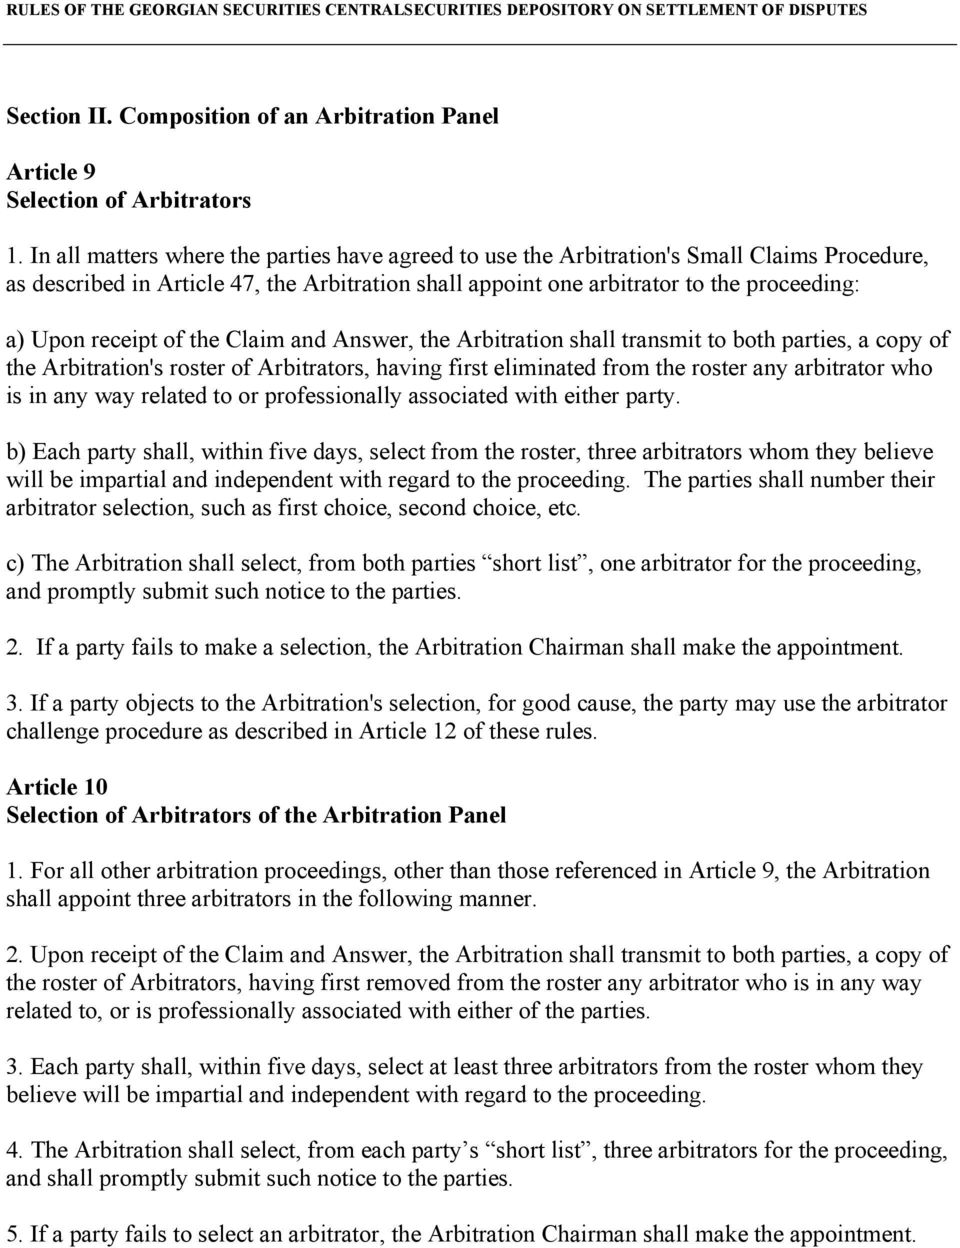 receipt of the Claim and Answer, the Arbitration shall transmit to both parties, a copy of the Arbitration's roster of Arbitrators, having first eliminated from the roster any arbitrator who is in